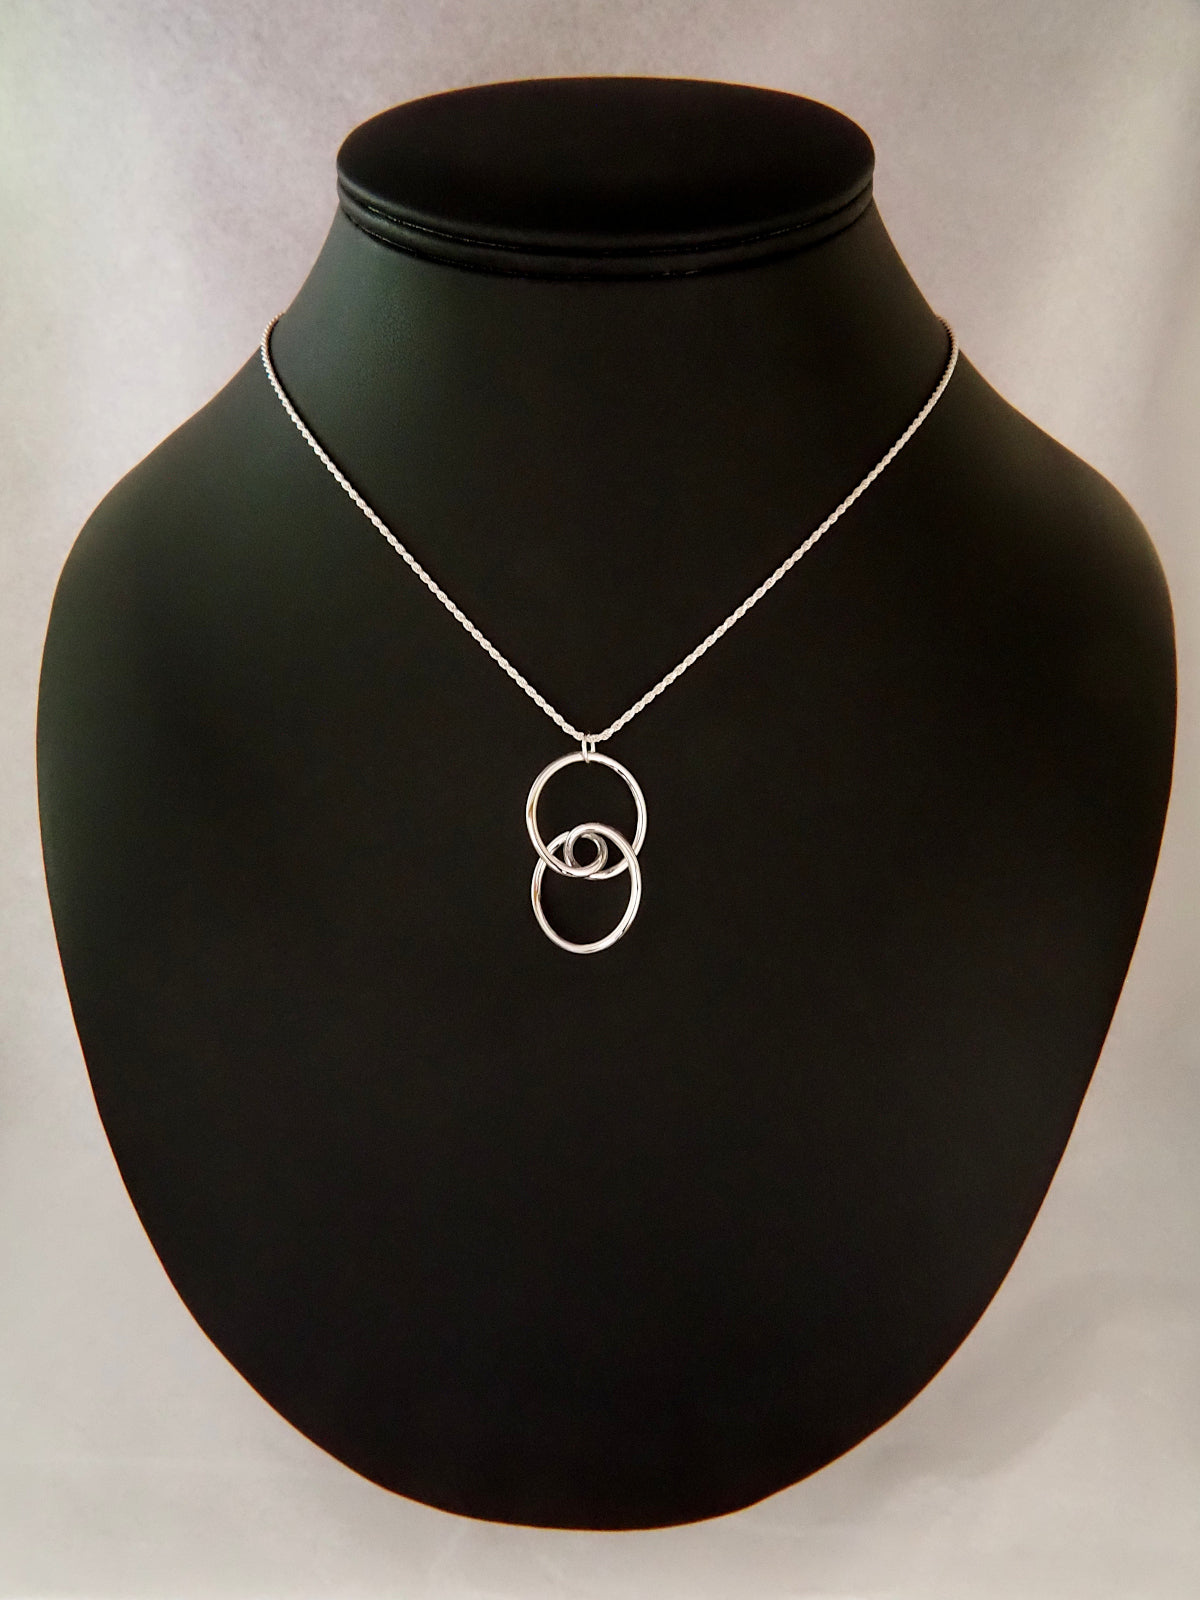 A rhodium-plated brass trefoil knot pendant on a black background in the general shape of two linked circular rings whose intersection is a stylized eye and having two-fold rotational symmetry about its horizontal and vertical axes, and about its center.